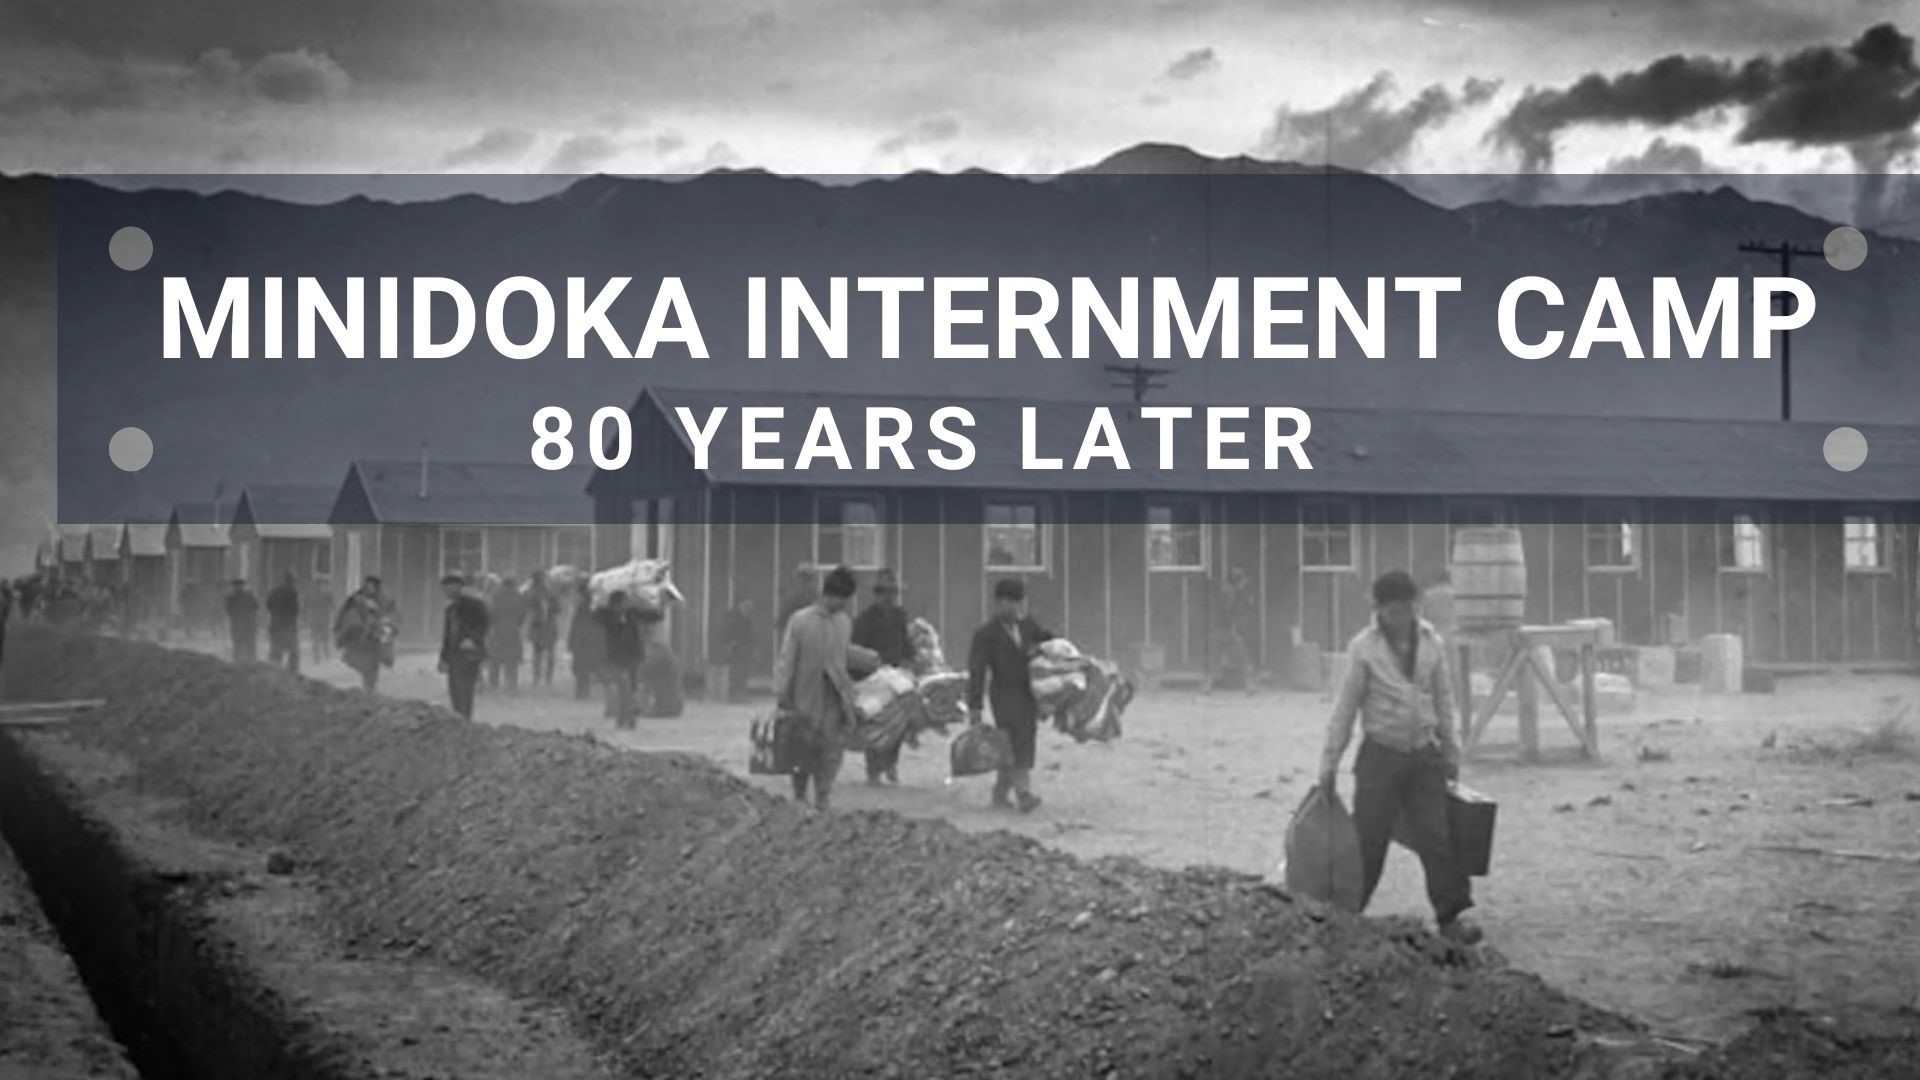 It's been 80 years since the Minidoka internment camp opened in Idaho. Now the Minidoka Pilgrimage Committee brings relatives of formerly incarcerated to barracks.